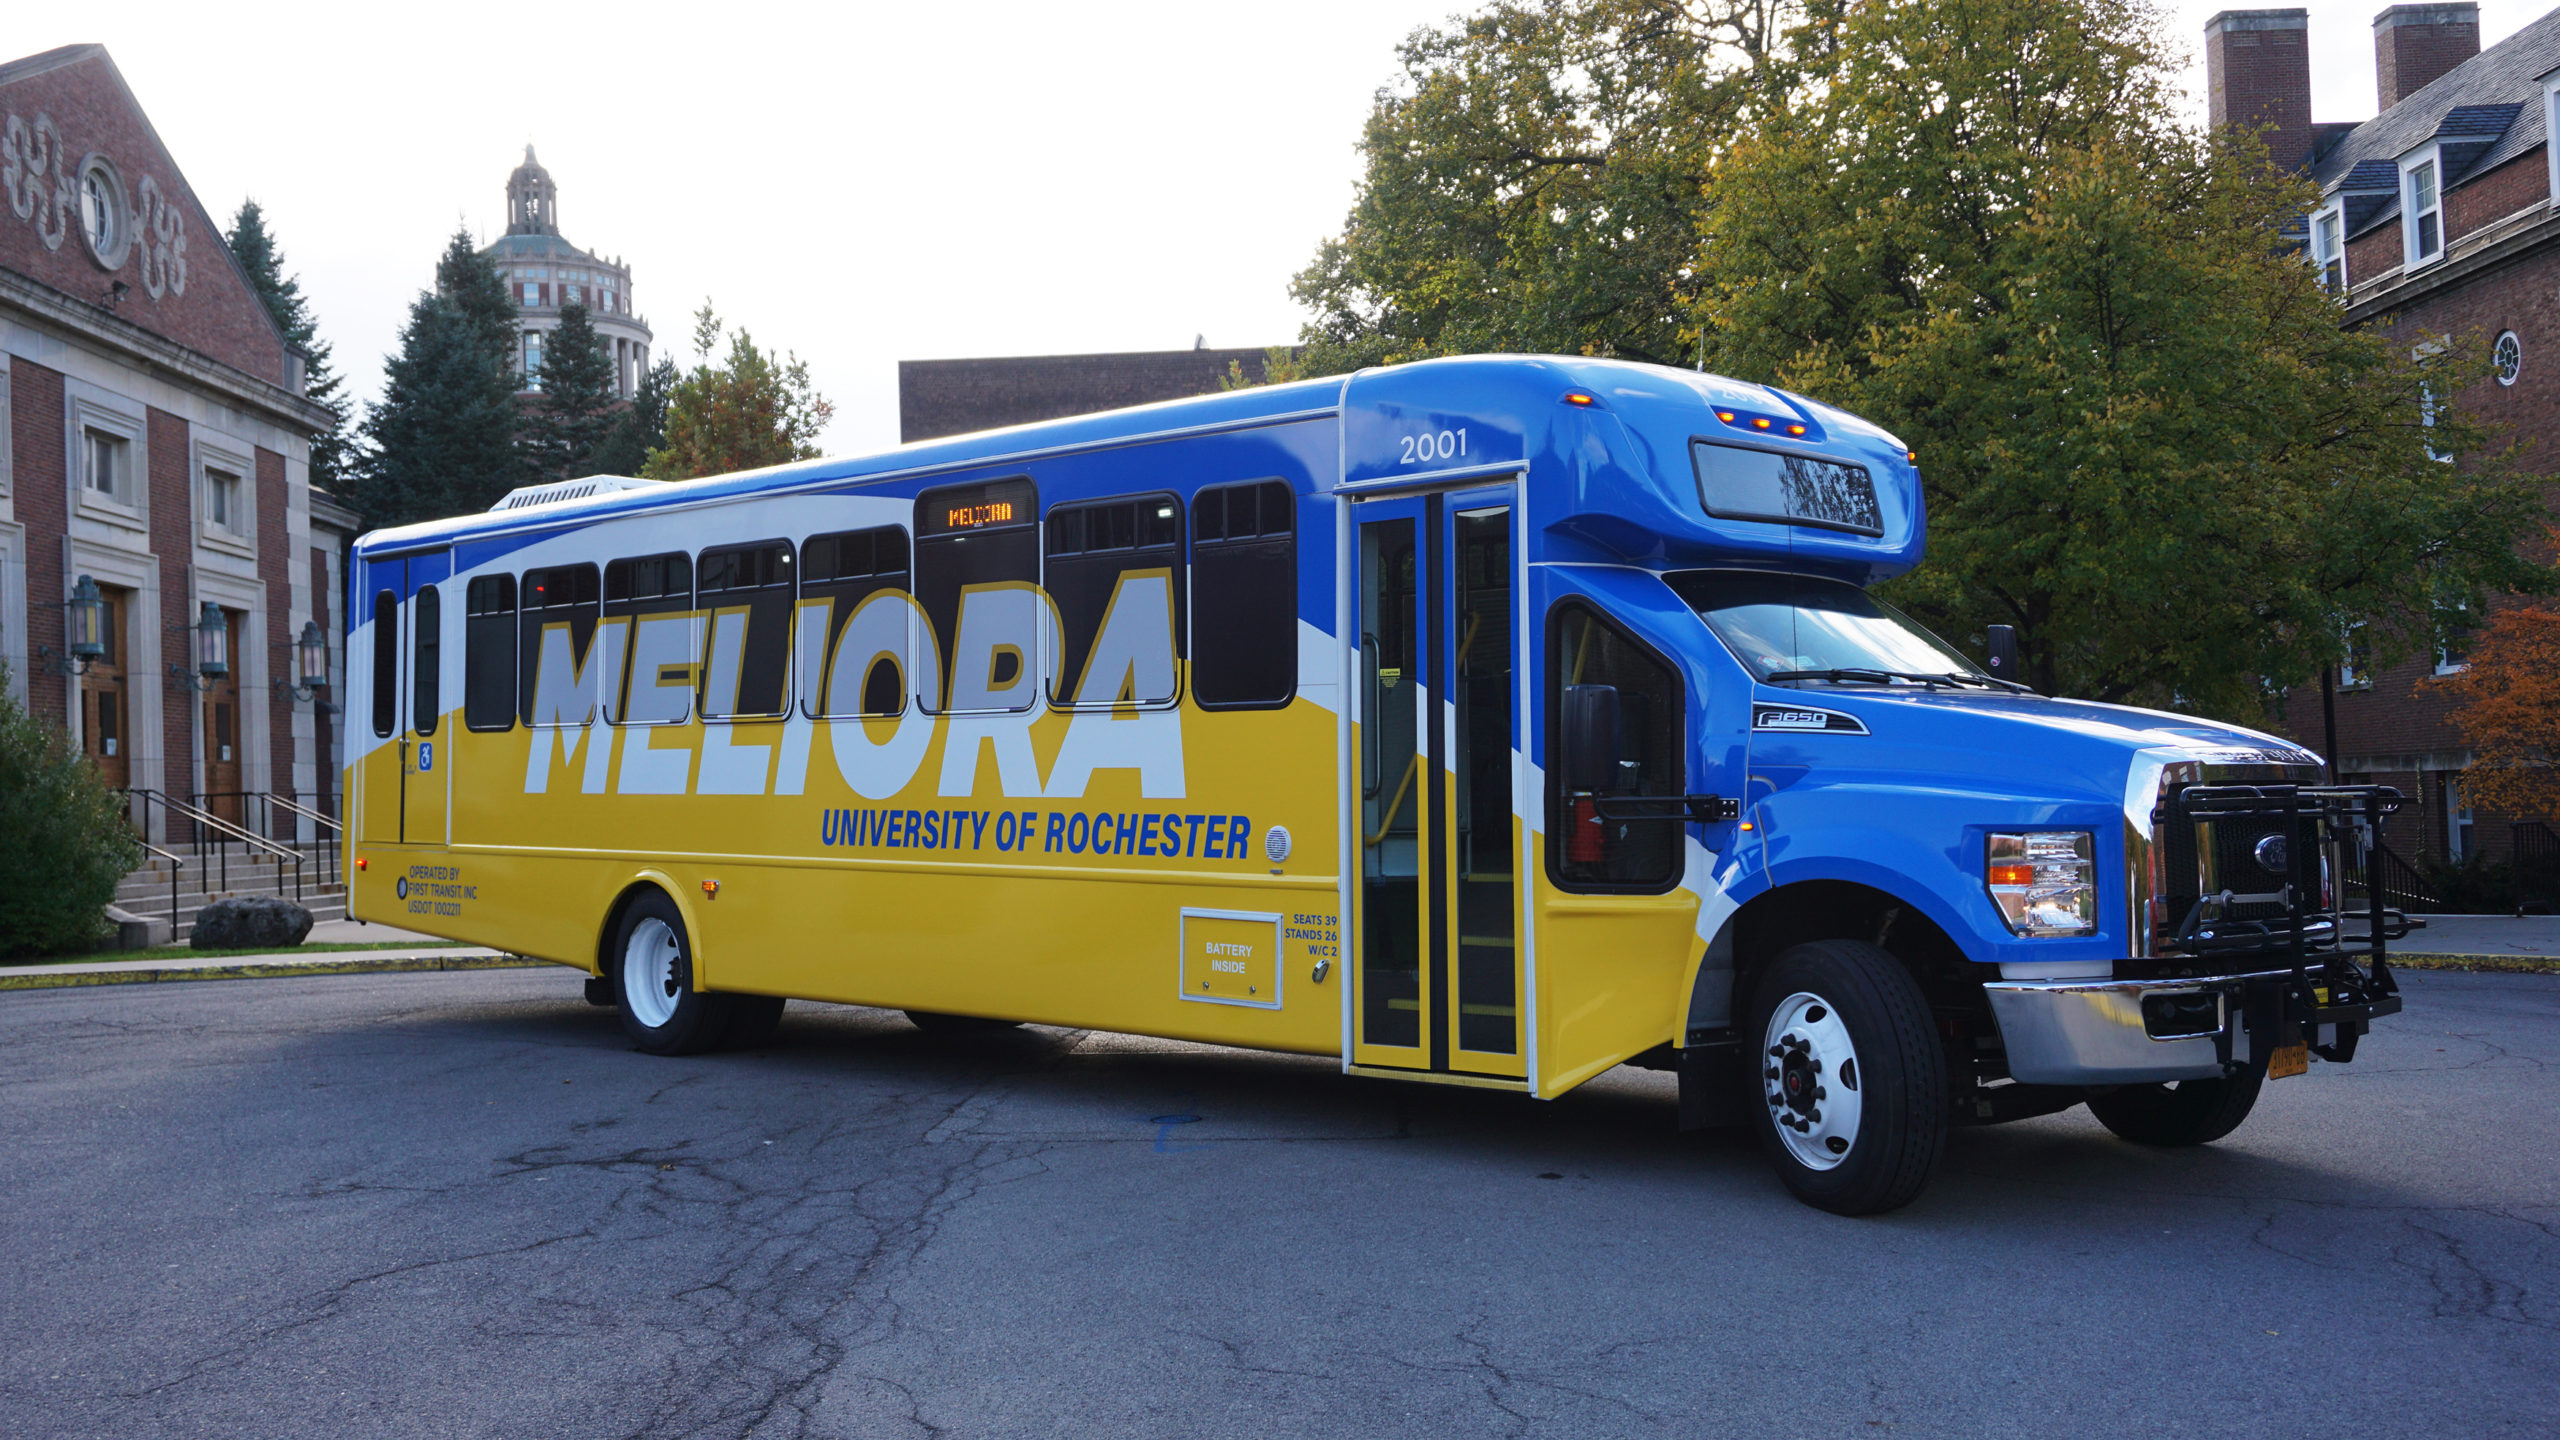 University of Rochester shuttle bus with new blue and yellow wrap